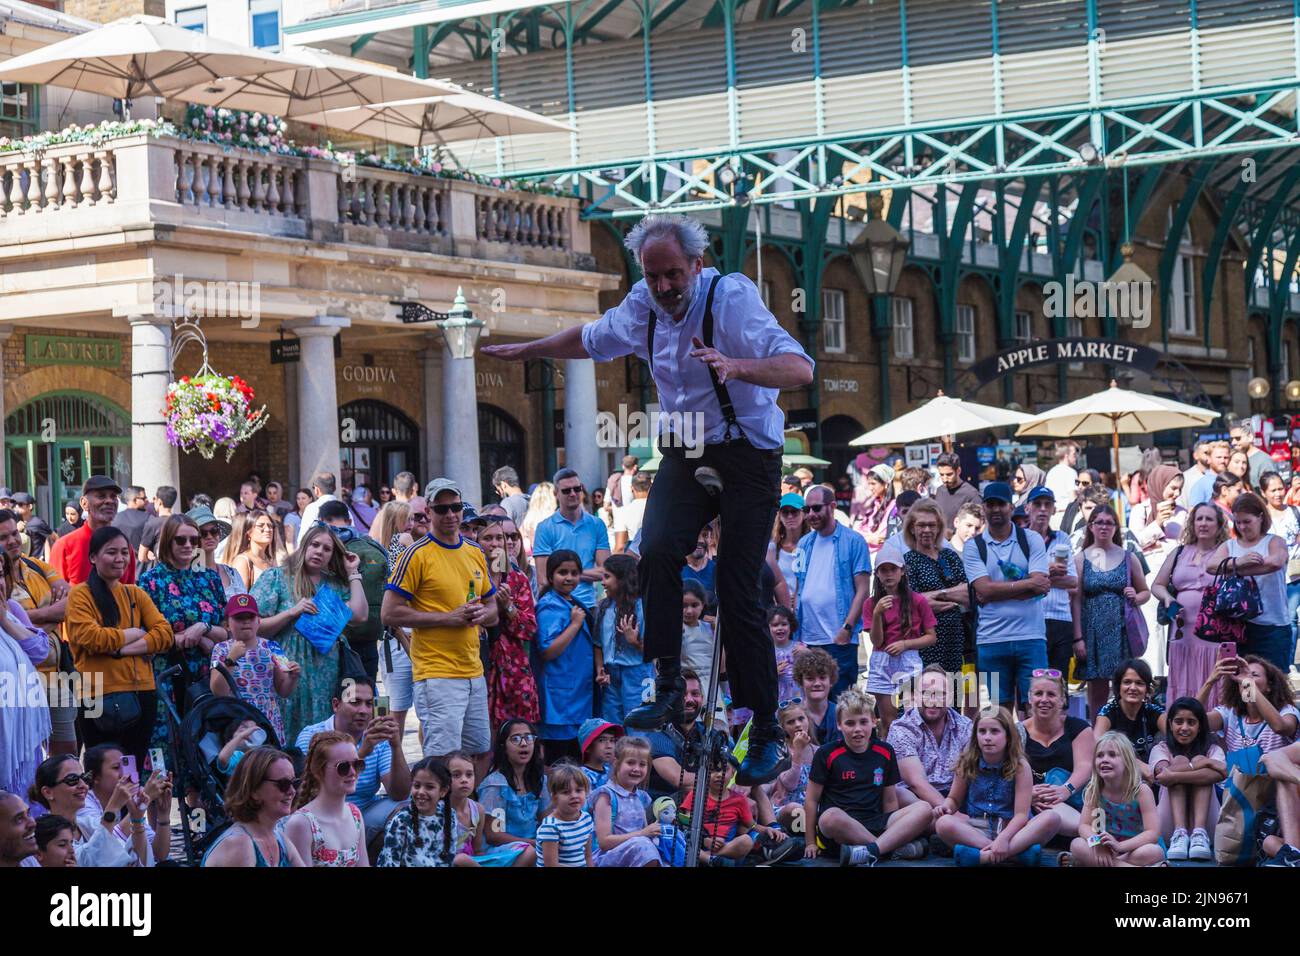 A male juggler entertaining crowds on a unicycle in Covent Garden,London,England,UK Stock Photo